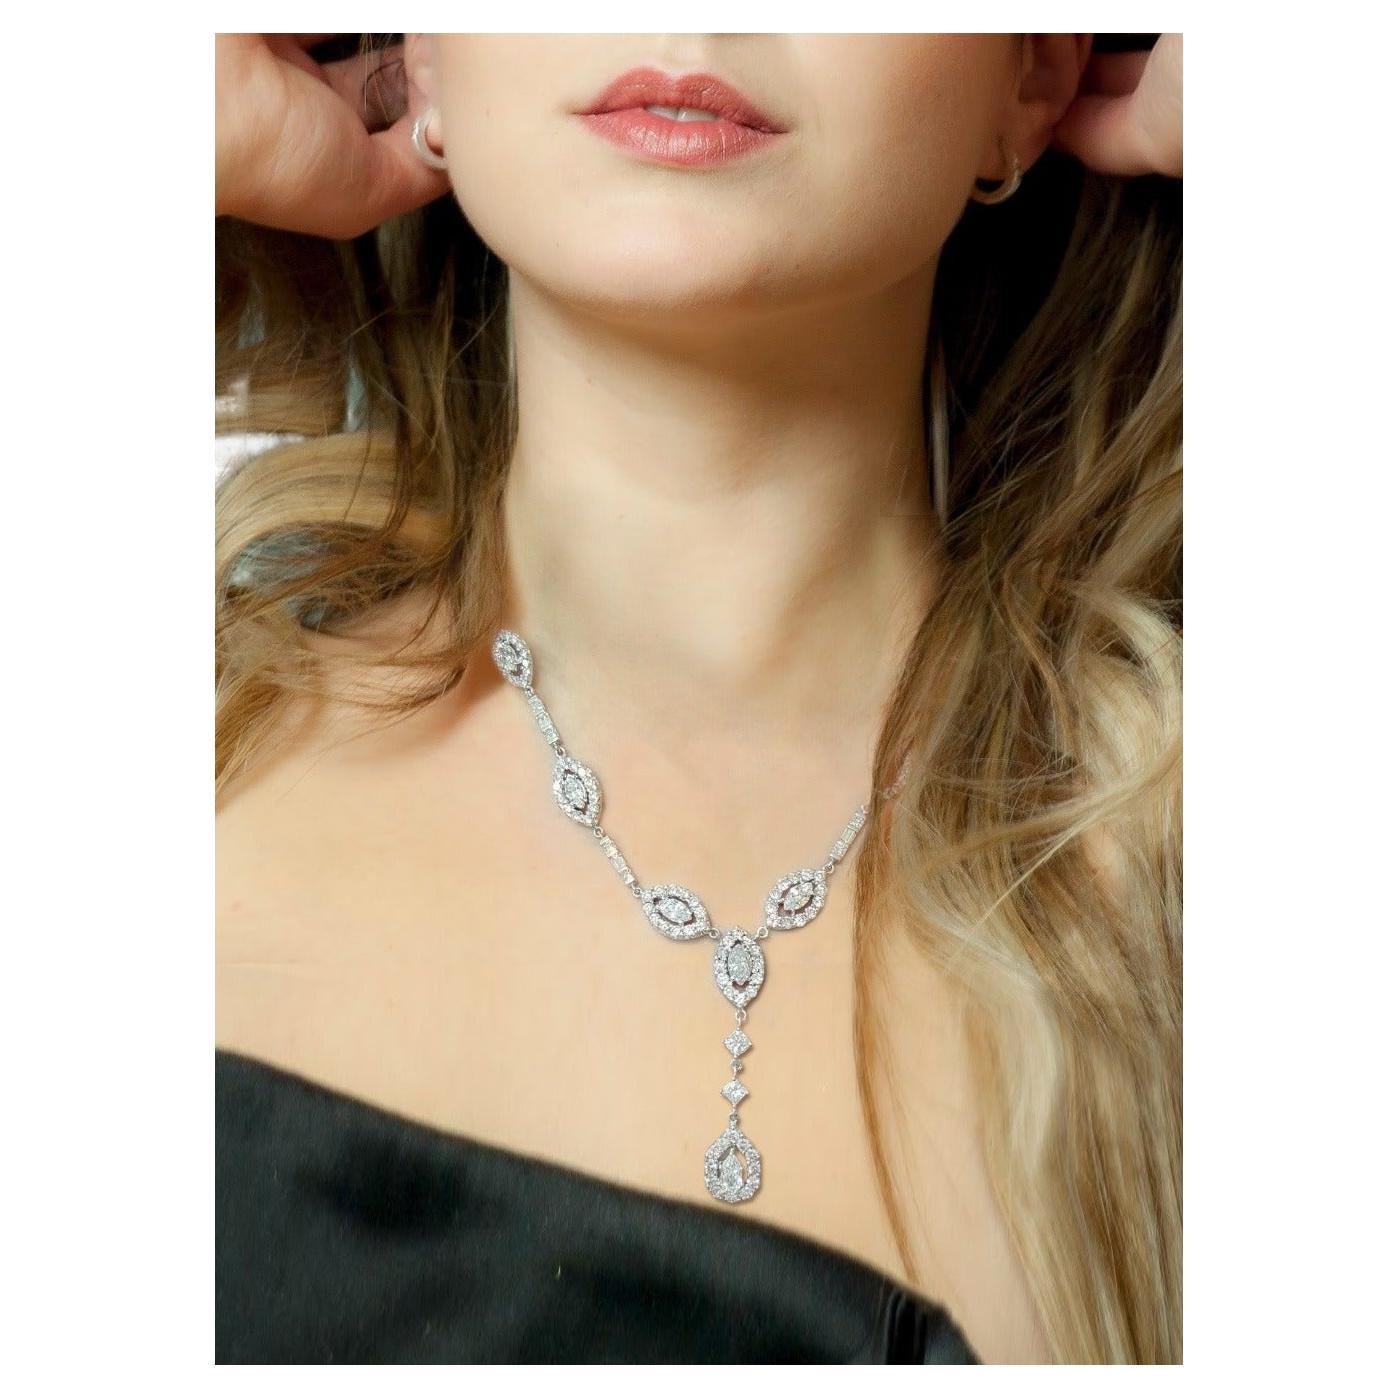 44 Carats Marquise, Round, Pear Diamond Choker Necklace